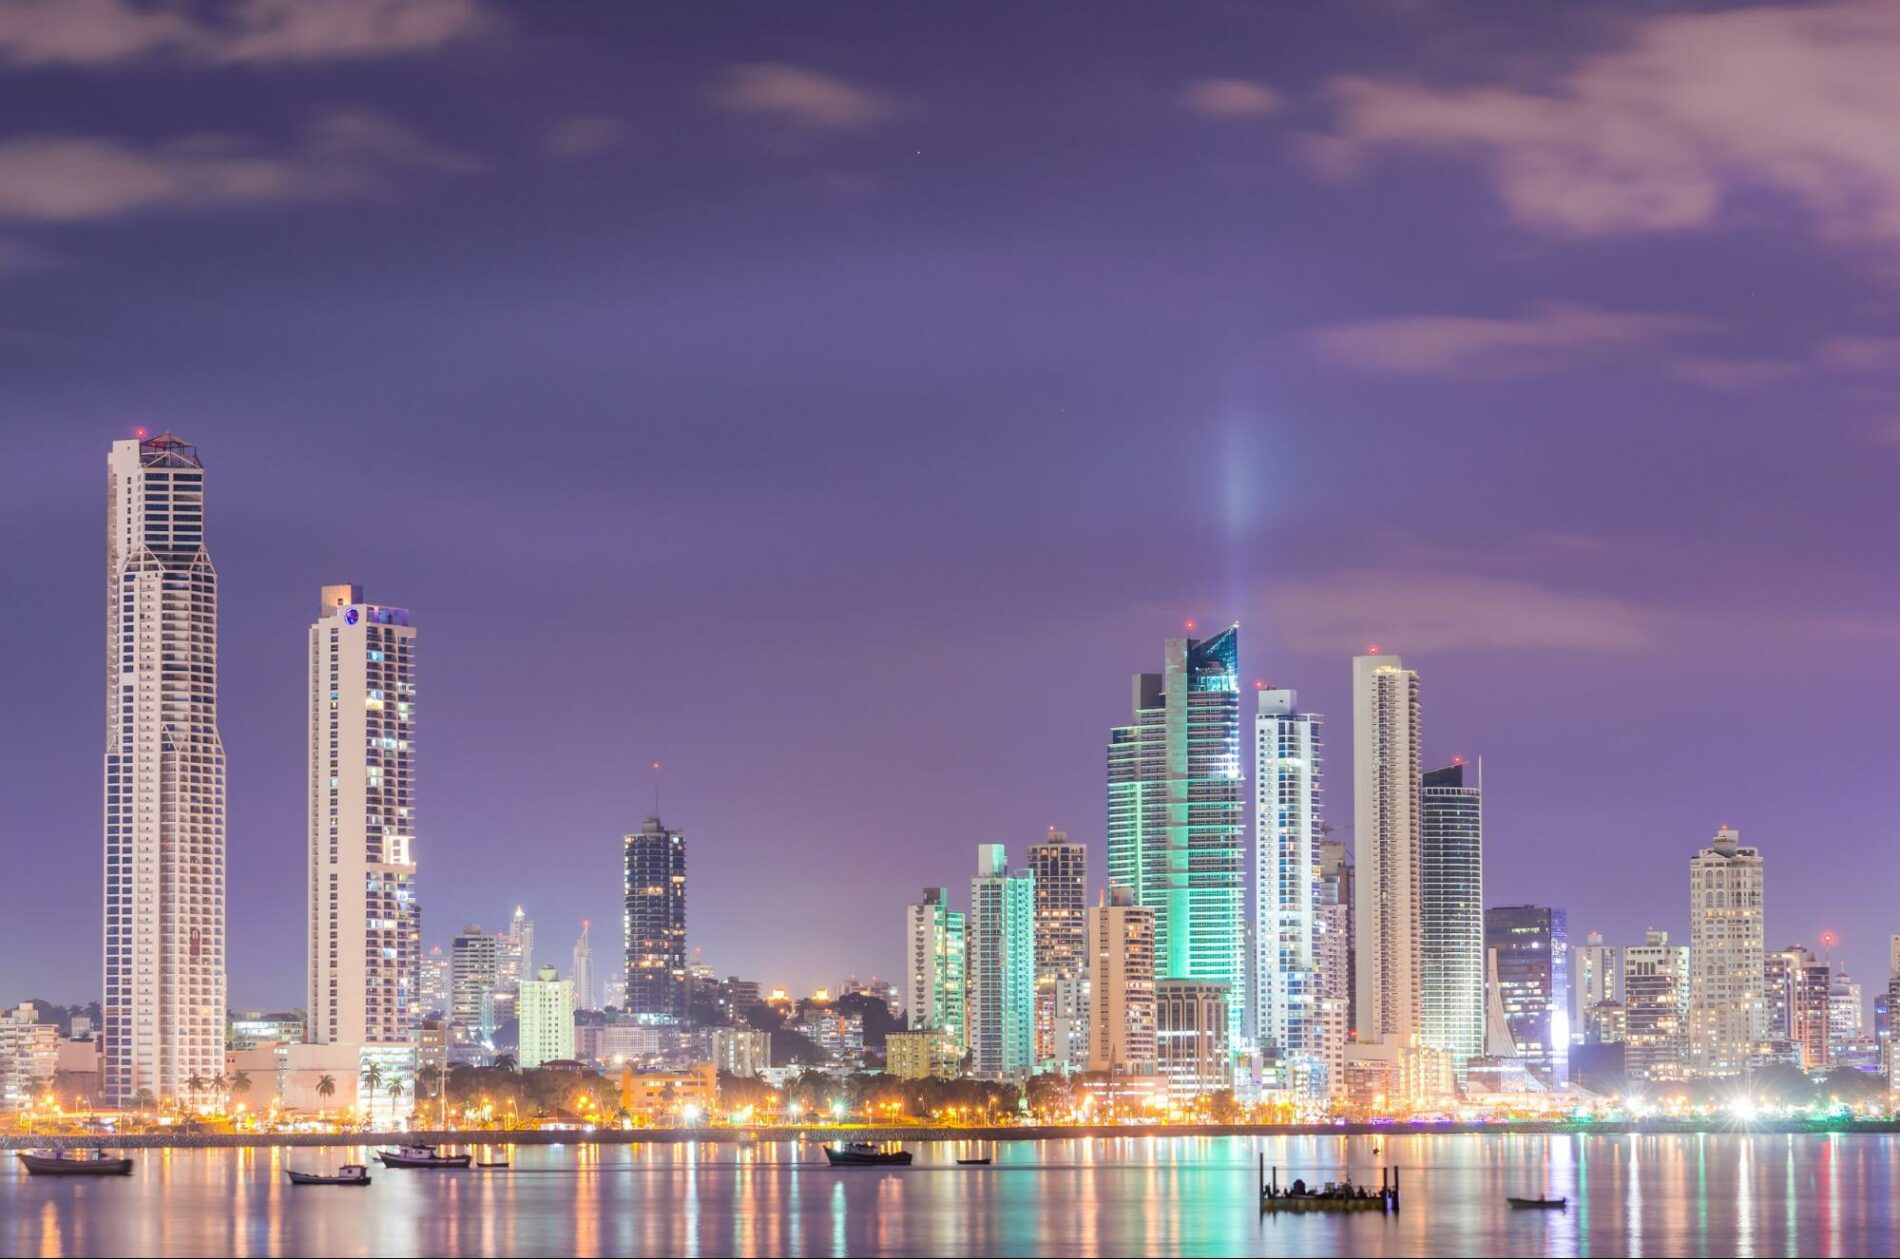 Night Skyline Of Panama City Which Sits On The Pacific Coast, Close To The Panama Canal